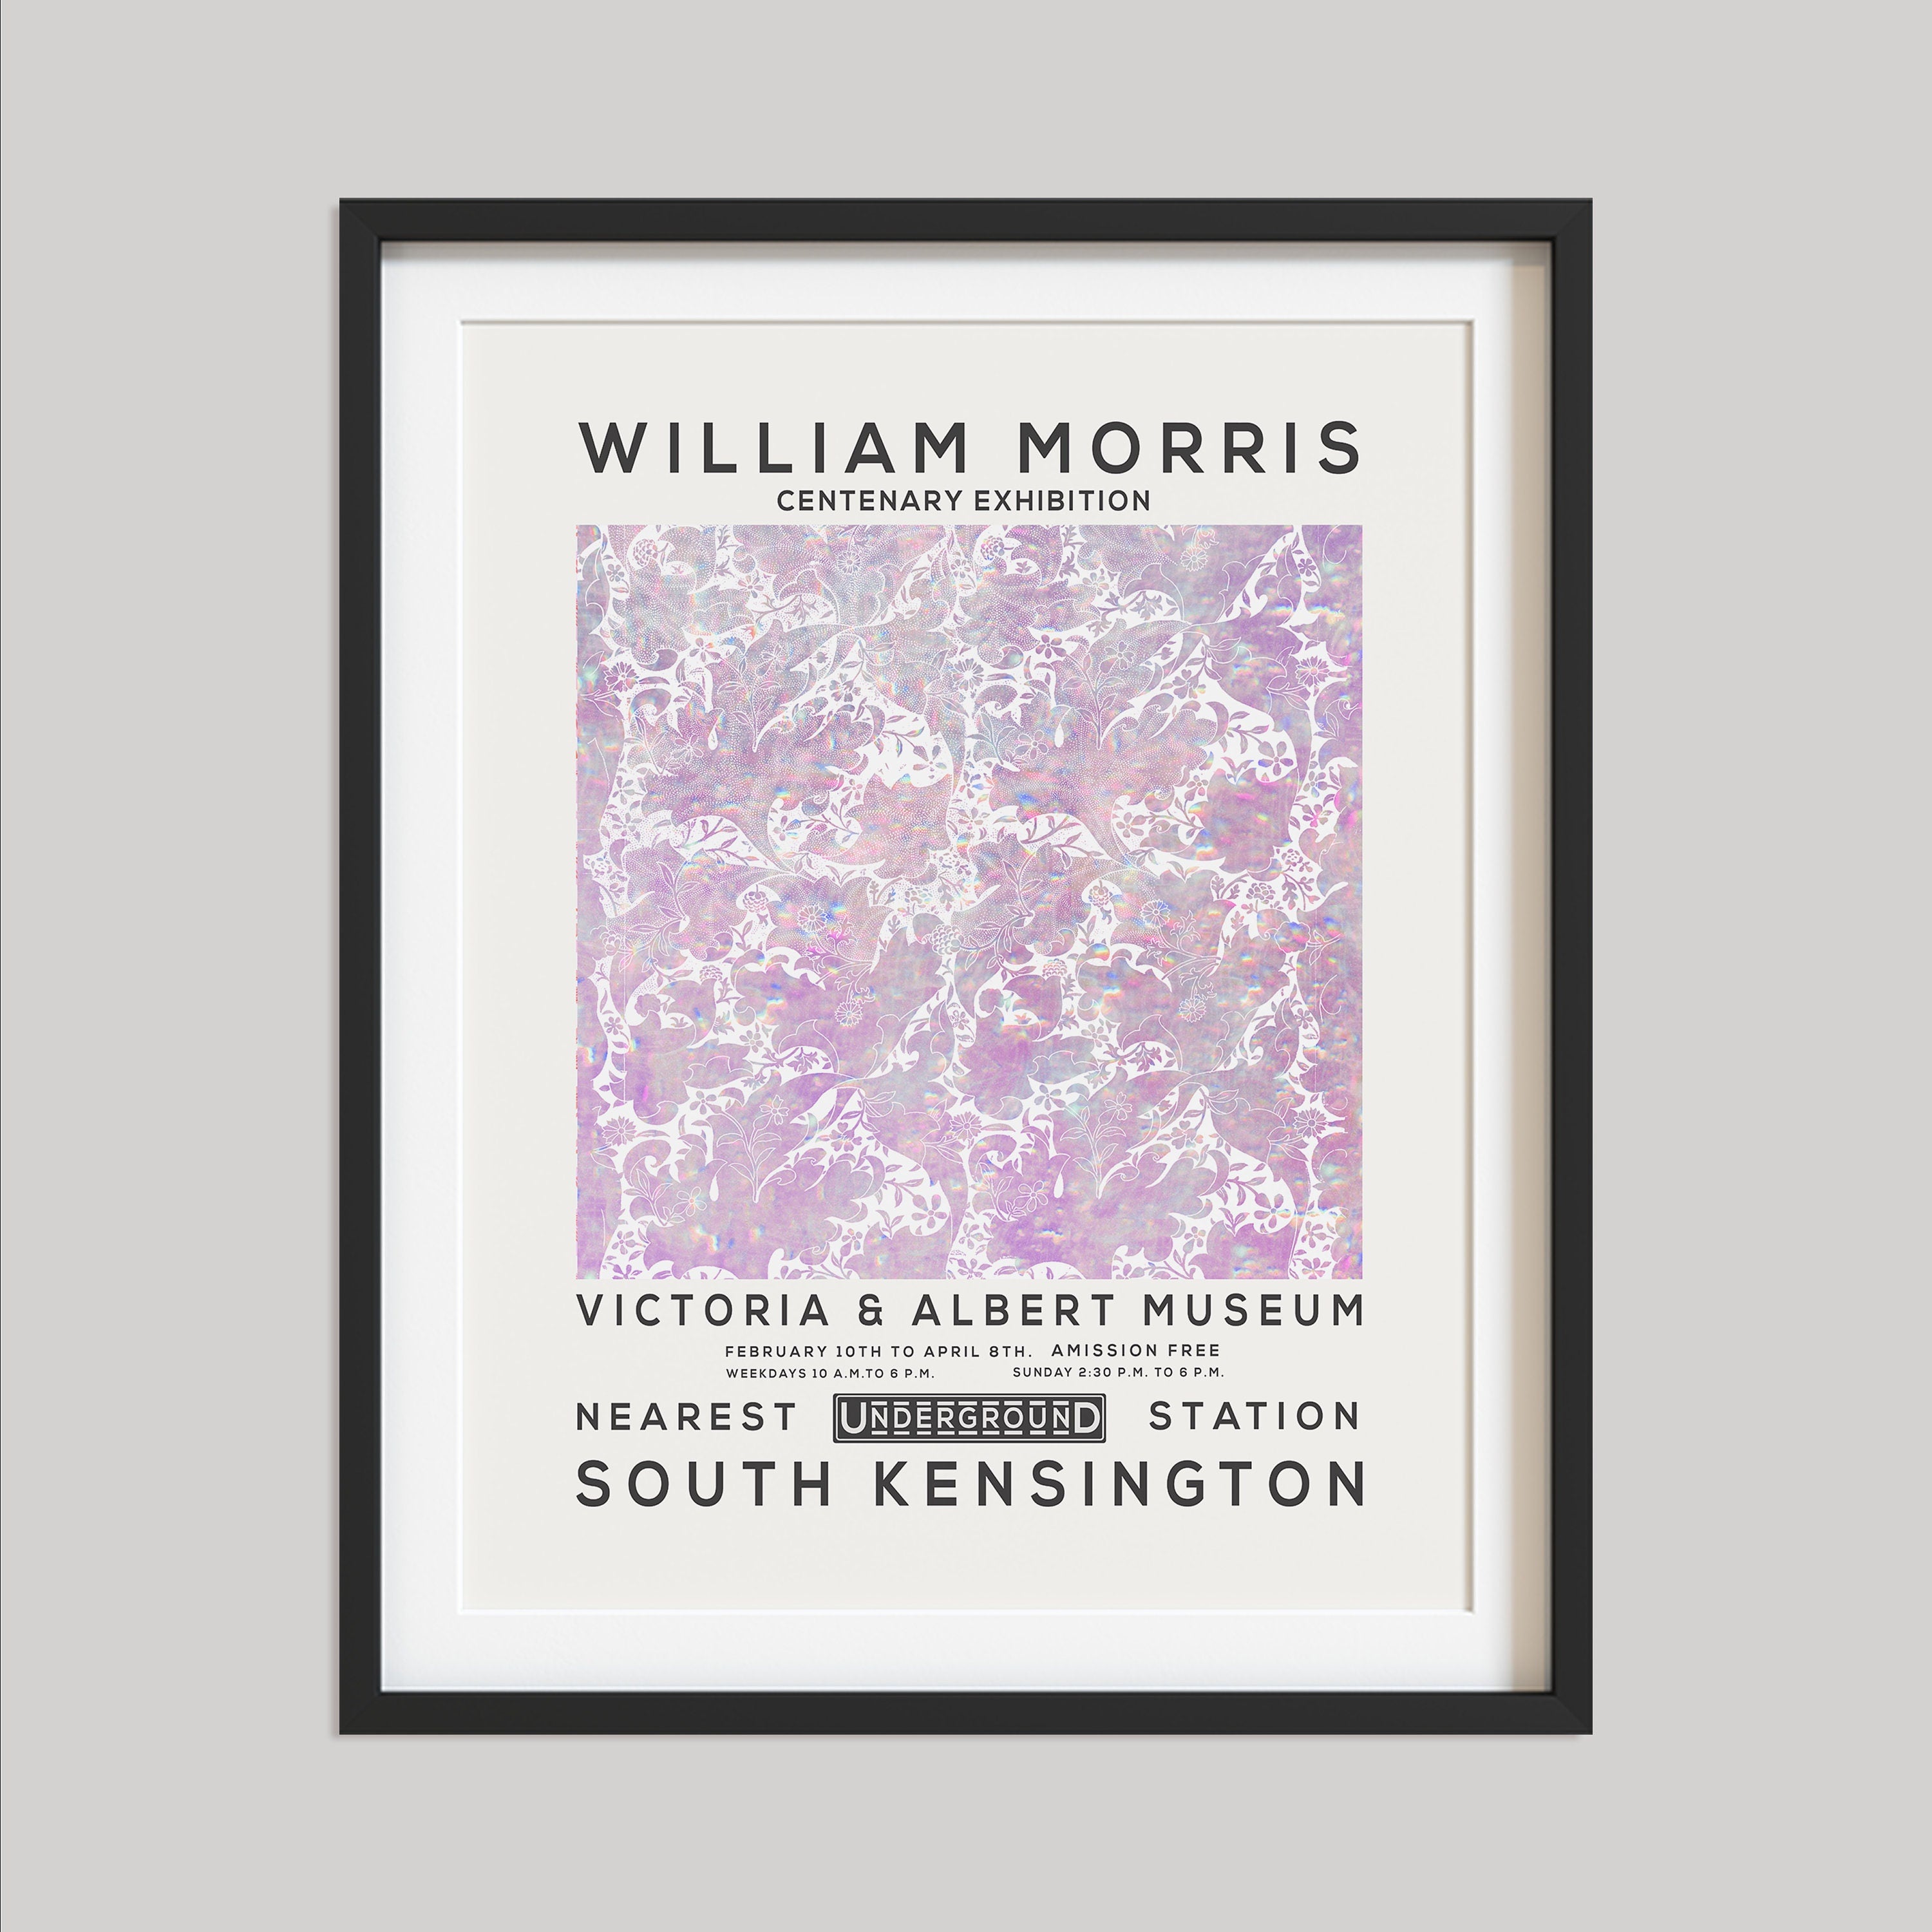 William Morris Print, Vintage Wall Decor, Exhibition Poster, Floral Wall Art, Flower Print, Home Decor, Holographic 02